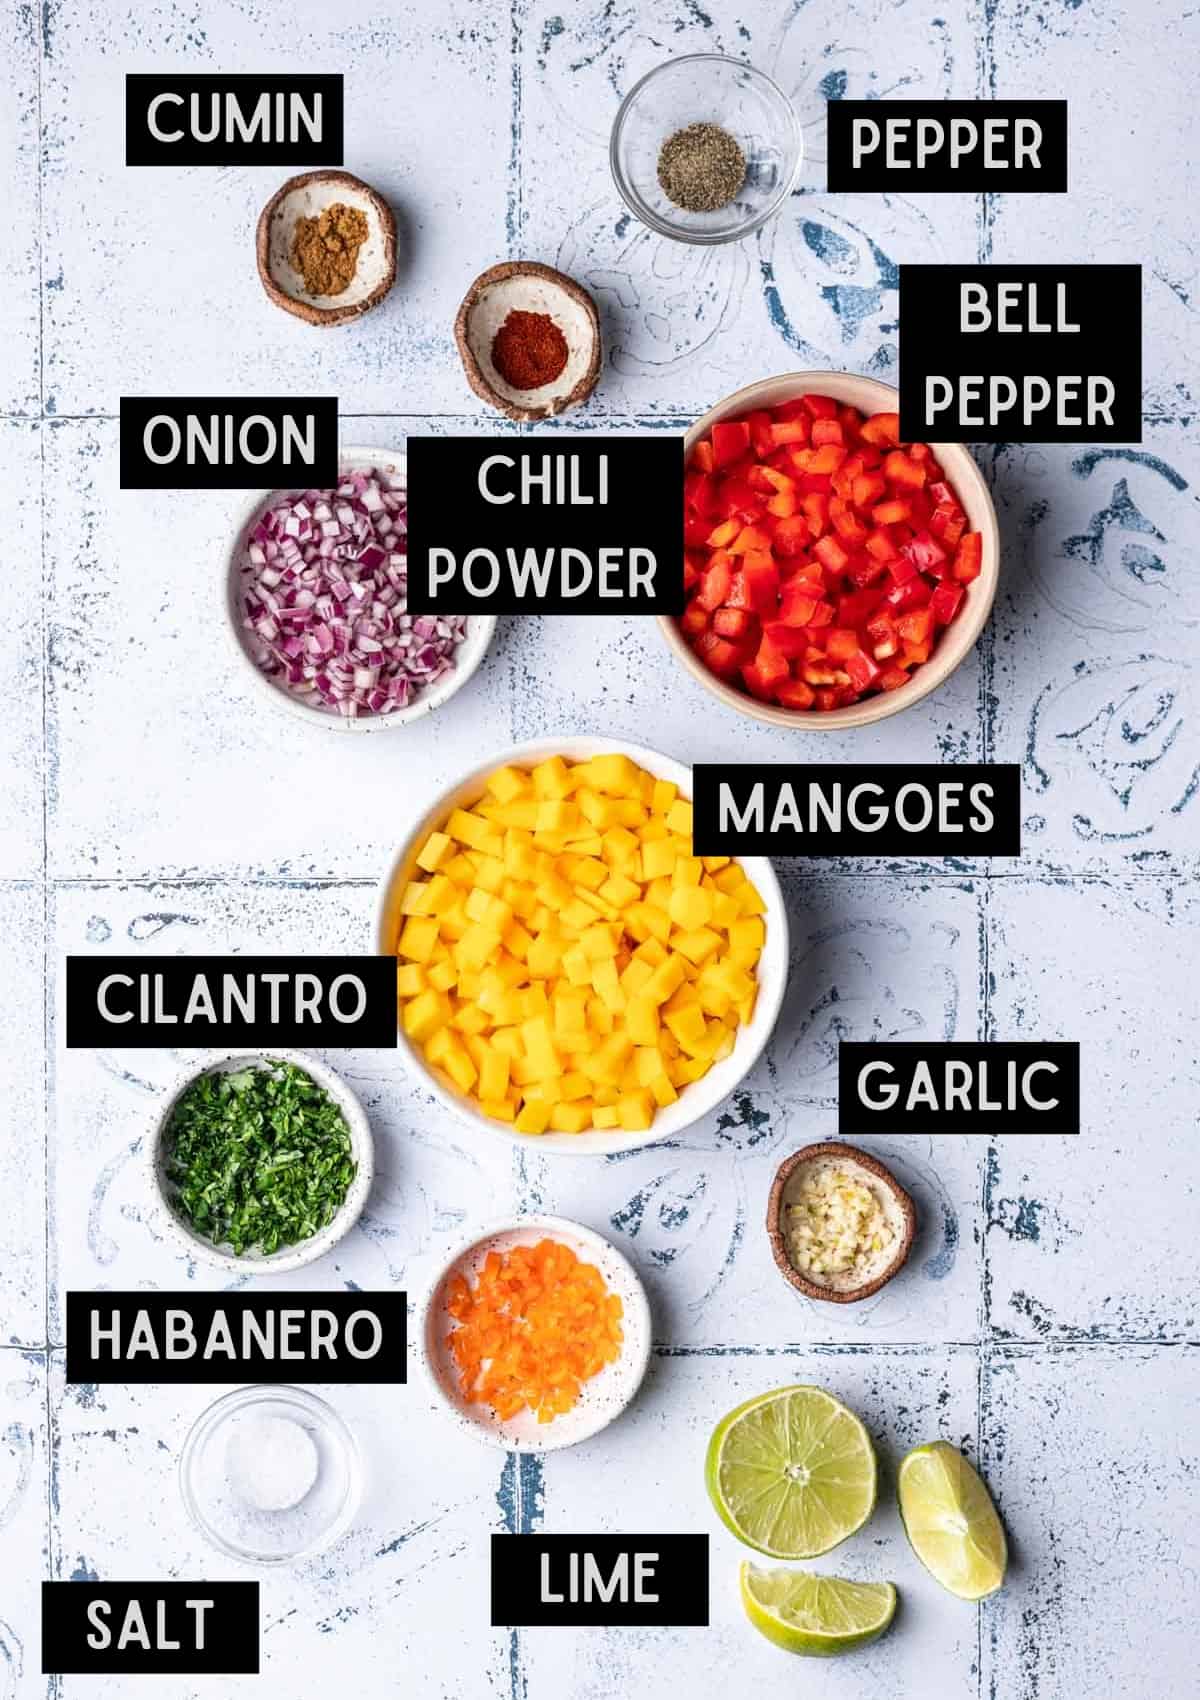 Labelled ingredients for mango habanero salsa (see recipe for details).